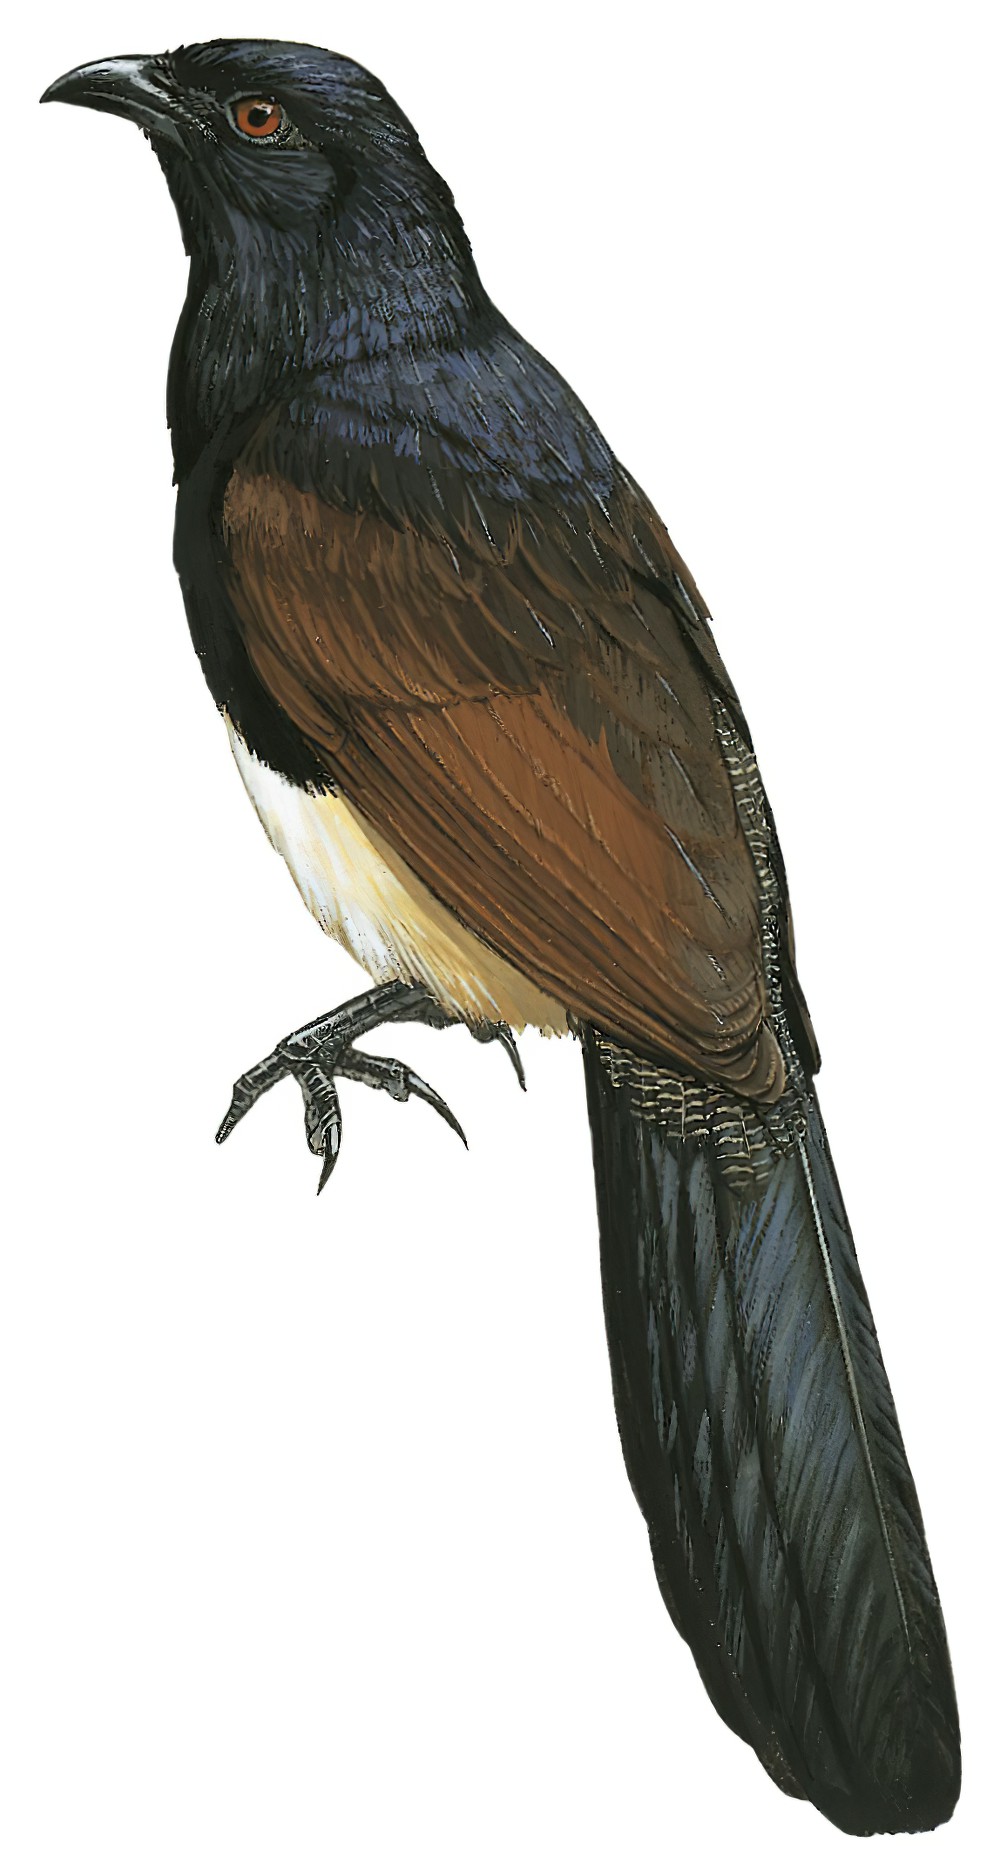 Black-throated Coucal / Centropus leucogaster